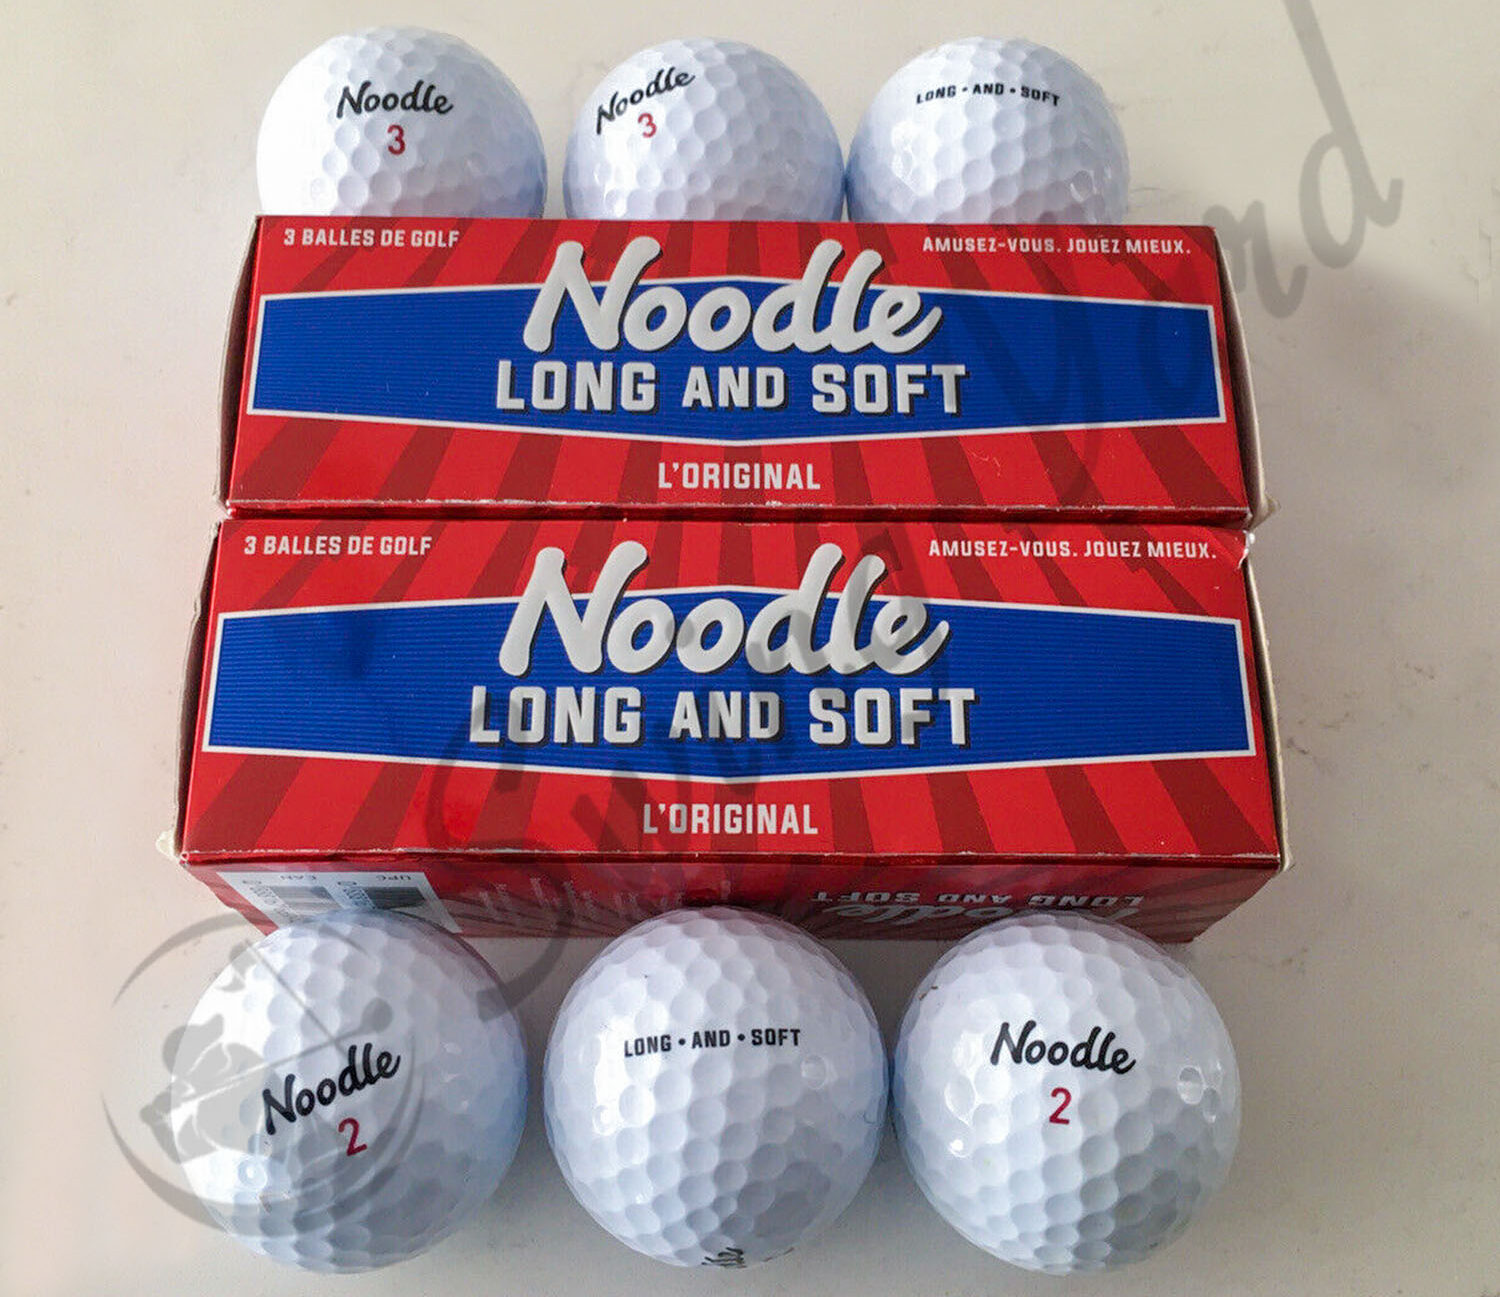 A TaylorMade Noodle Long and Soft golf ball box packaging at my house